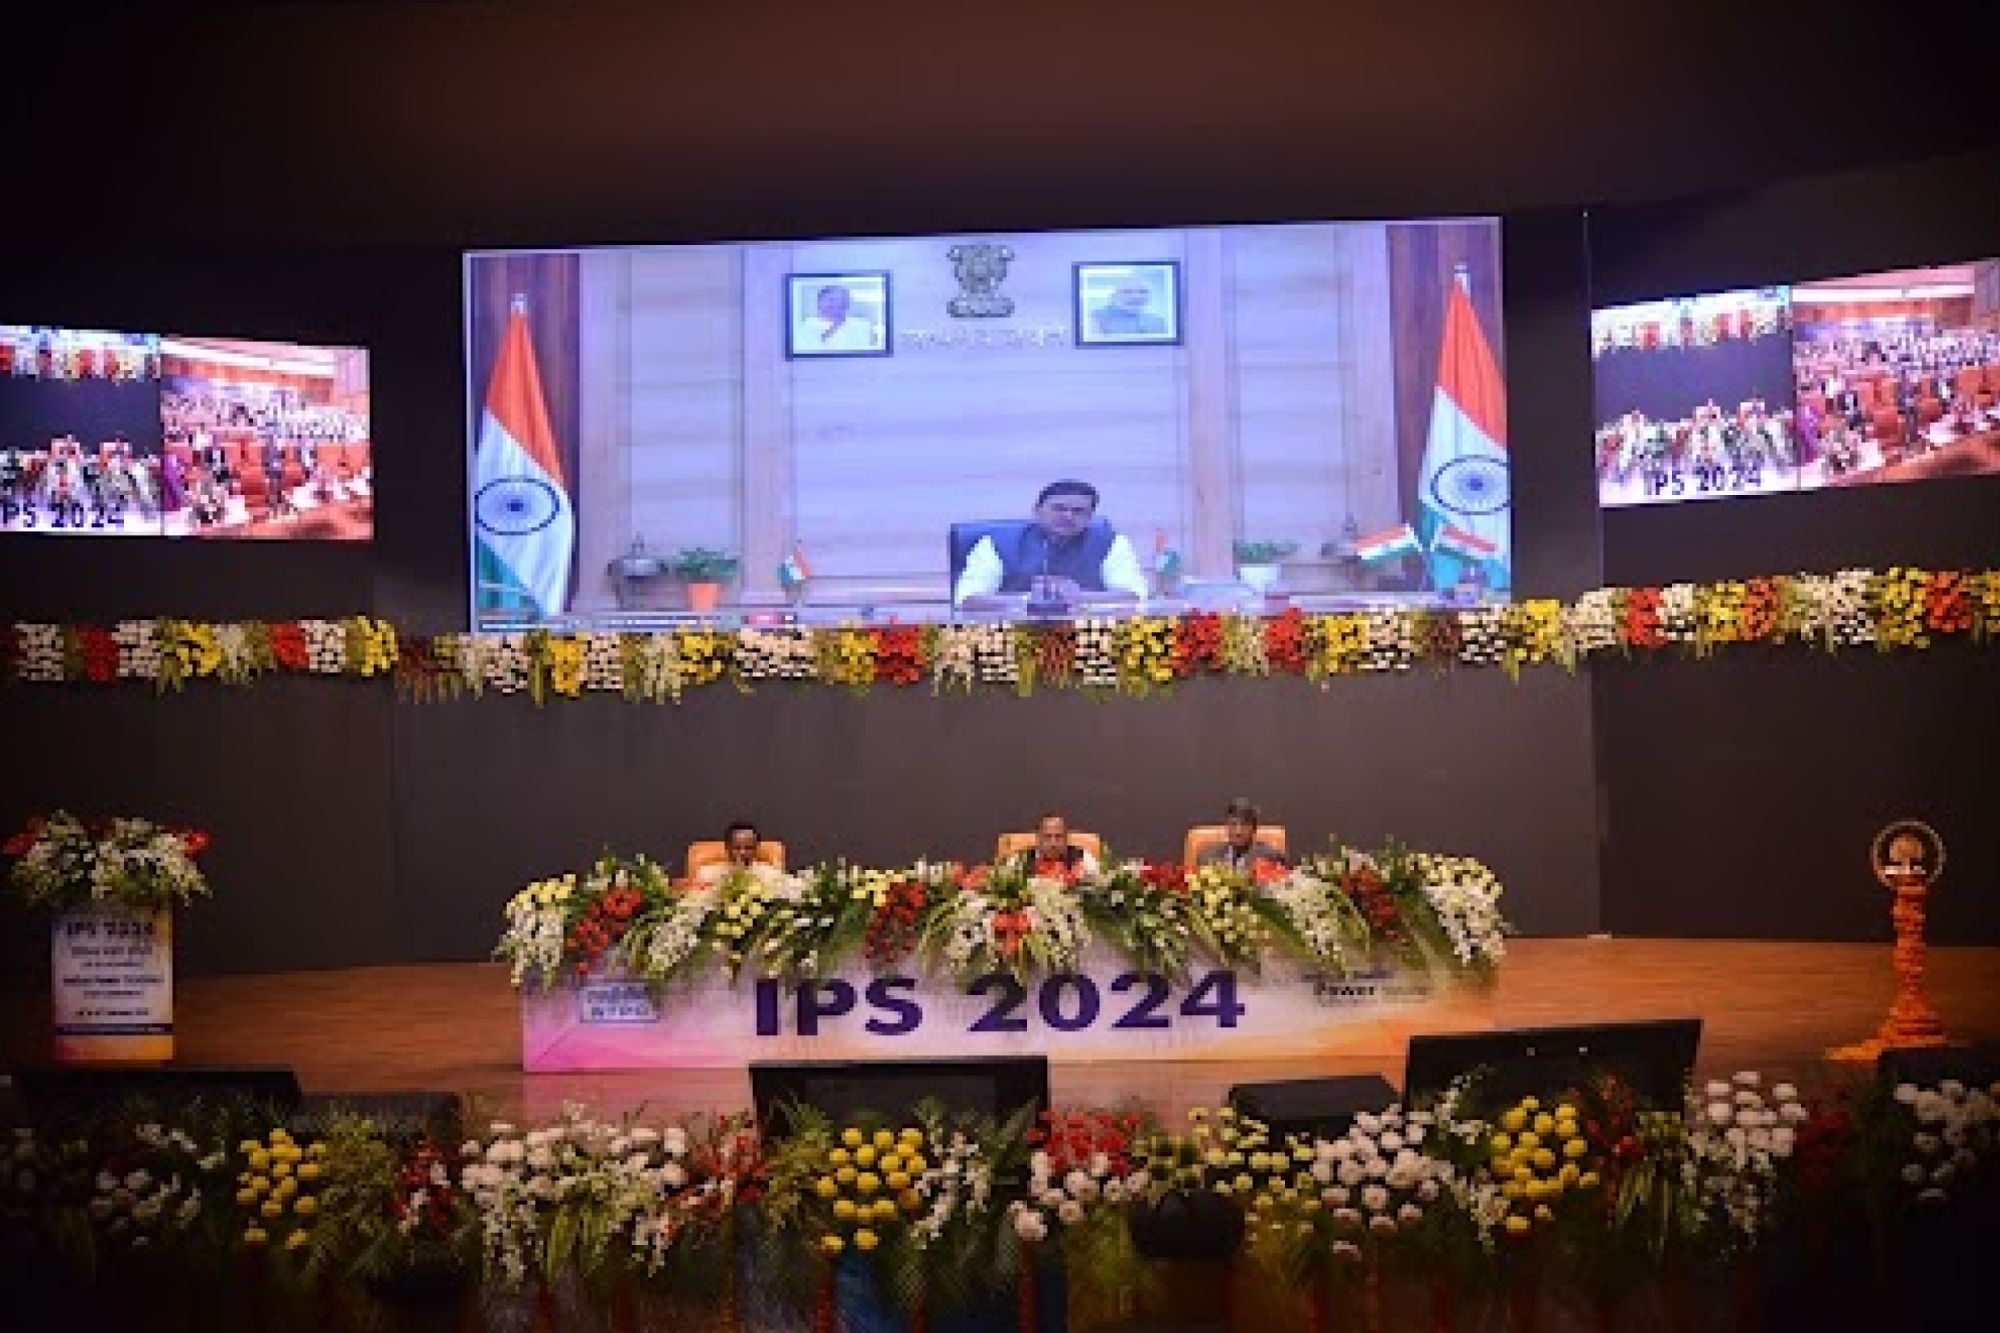 Minister RK Singh inaugurates NTPC’s ‘Indian Power Stations O&M Conference (IPS 2024)’ at Raipur